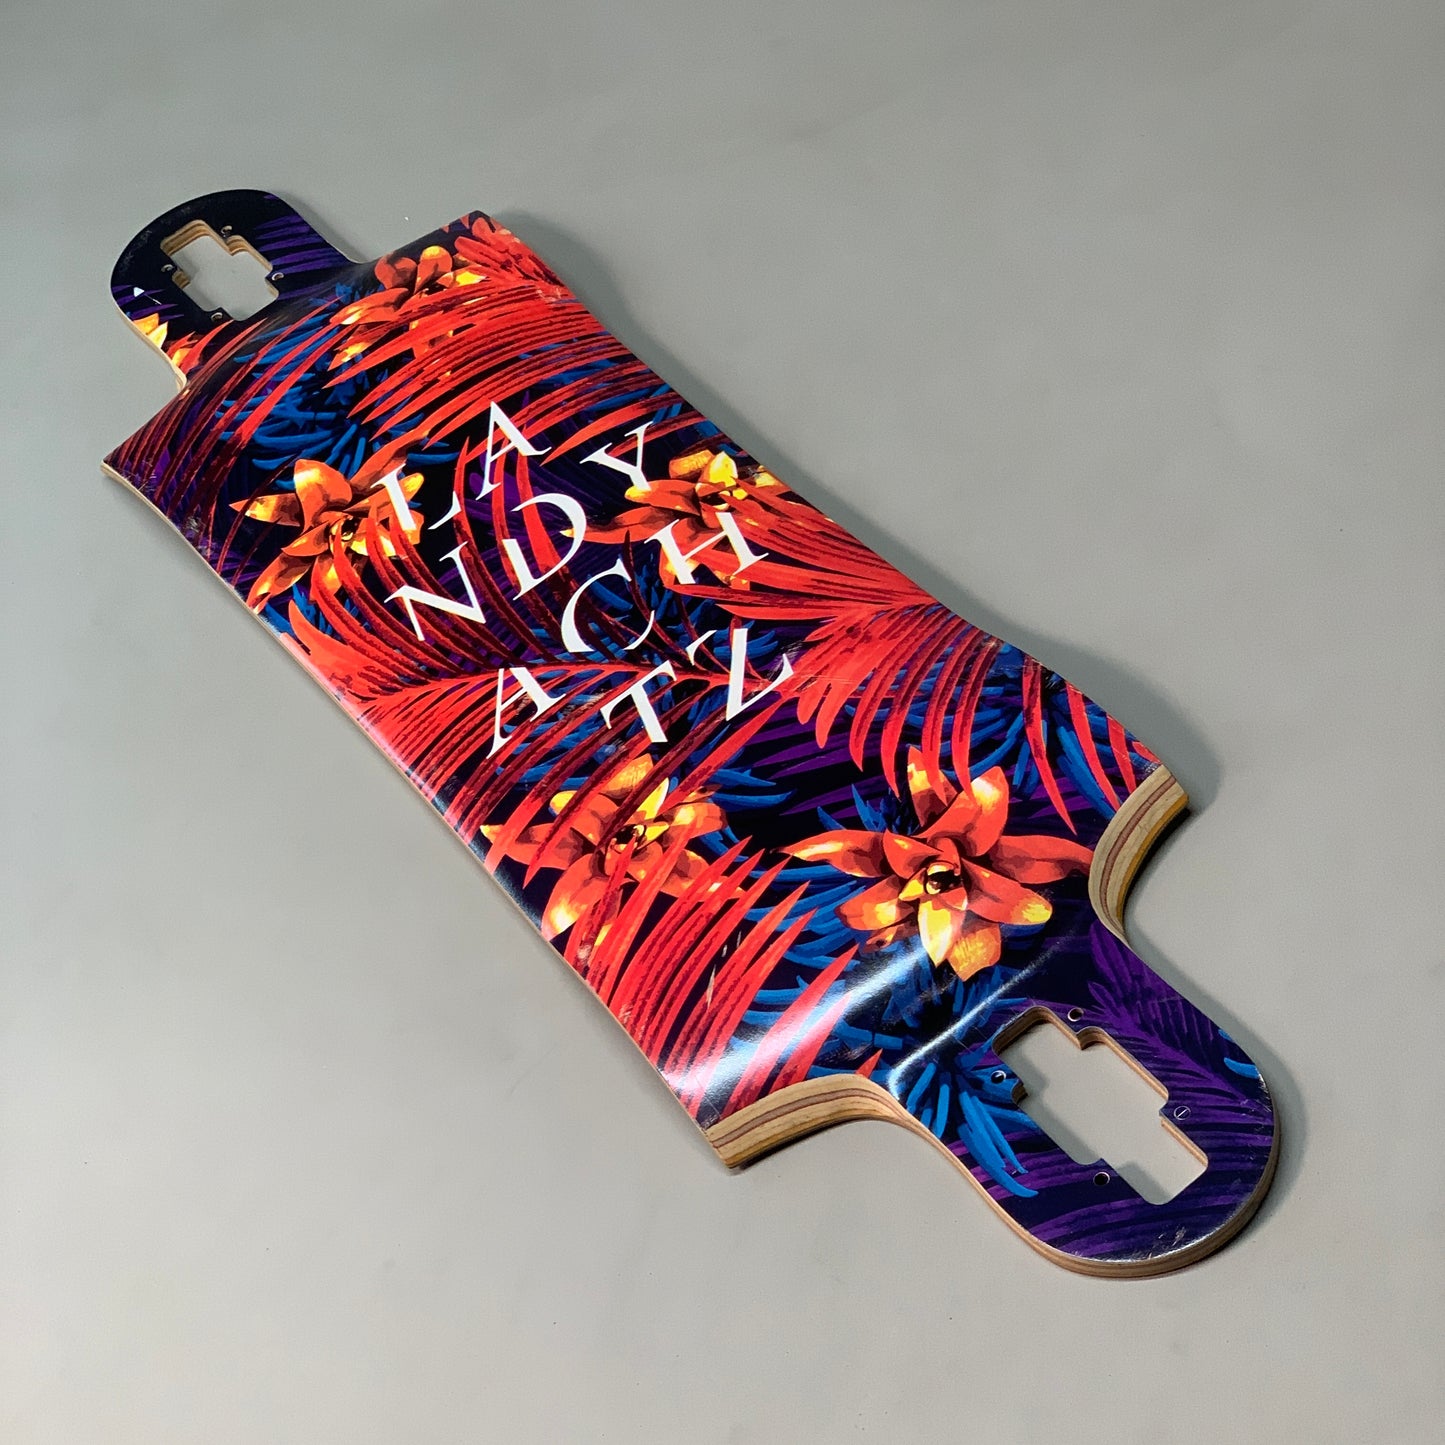 LANDYACHTZ Switchblade 36 Tropic Red/Orange/Blue Longboard Deck Without Grip Tape 36"x9.5" (New Other)